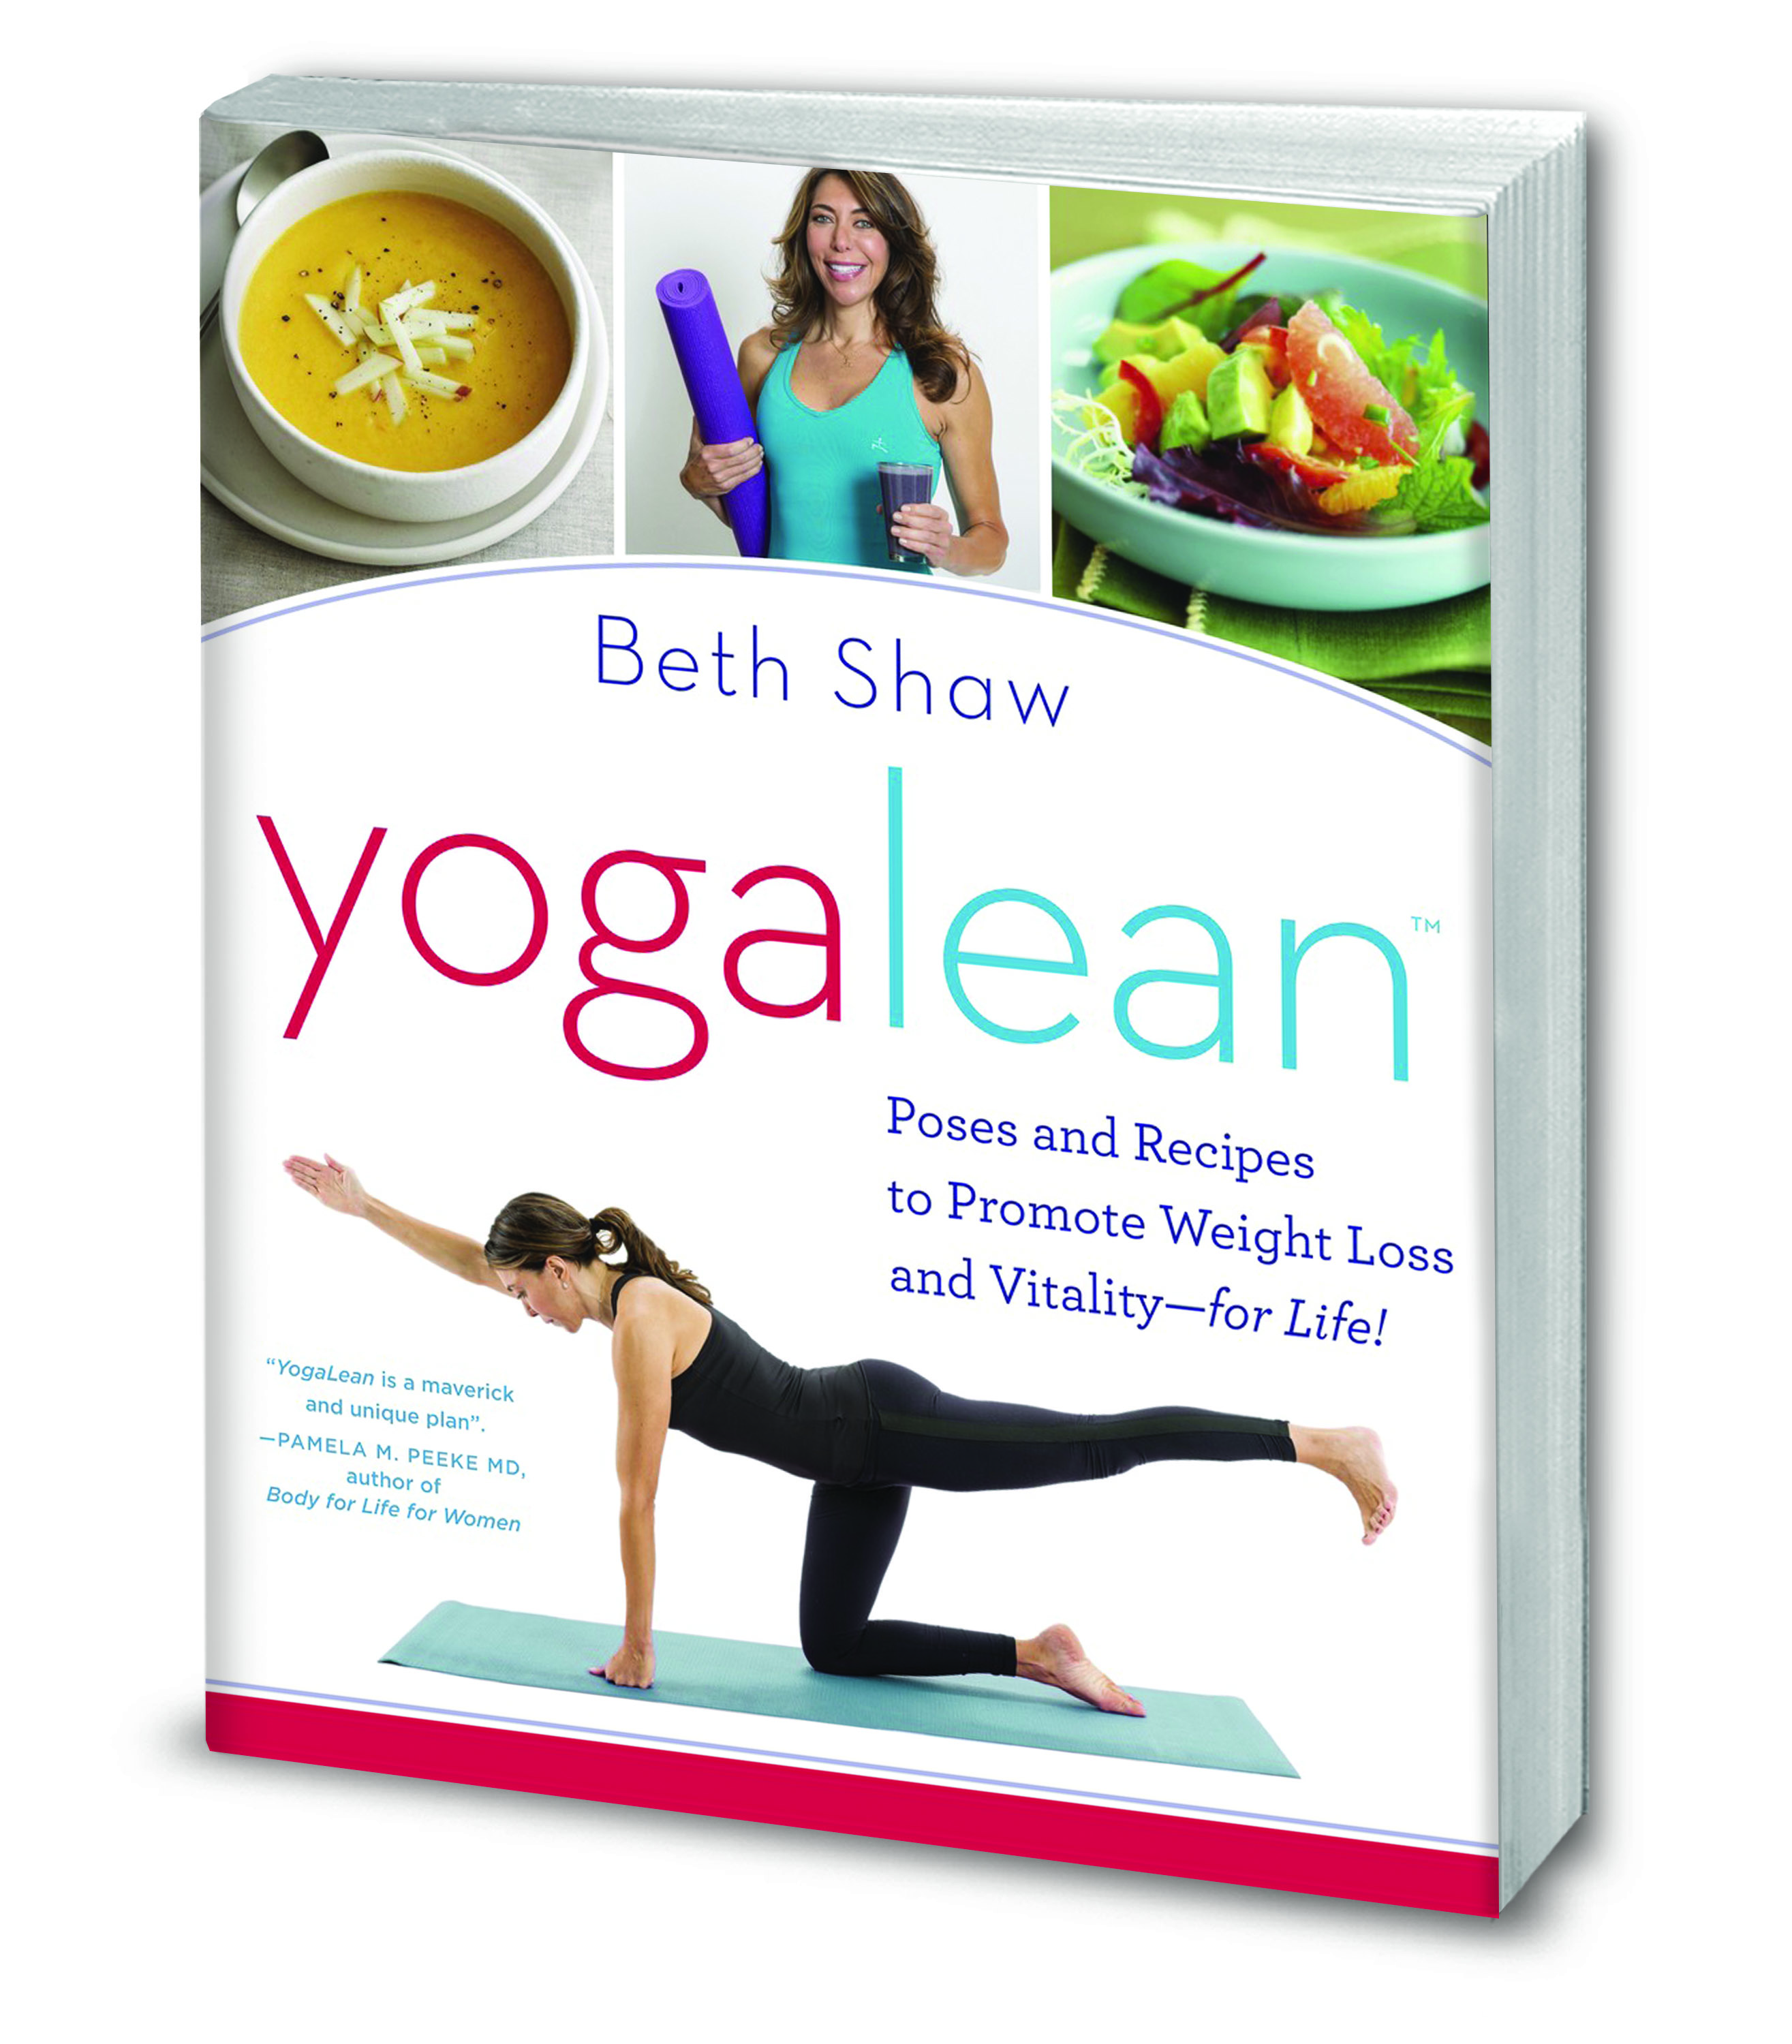 Introducing YogaLean, Poses and Recipes to Promote Weight Loss and Vitality-for  Life!